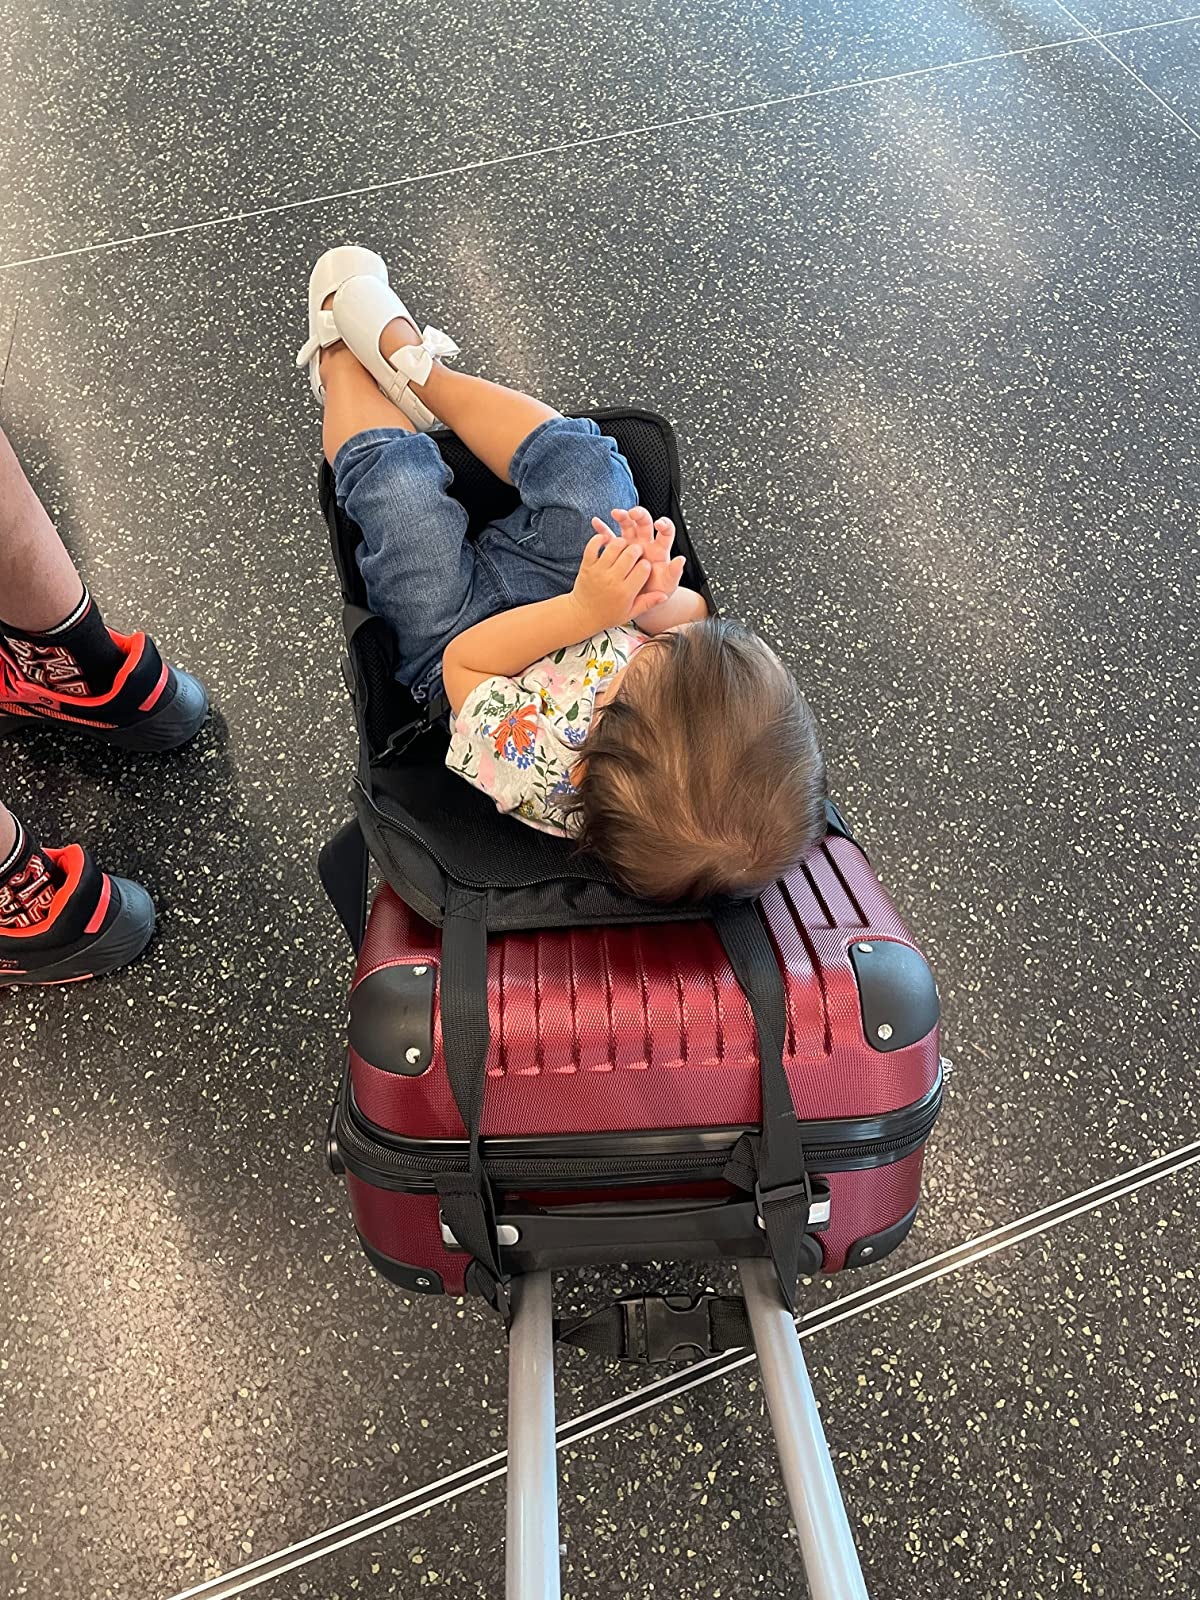 33 Tips And Products To Make Traveling With Kids Easier